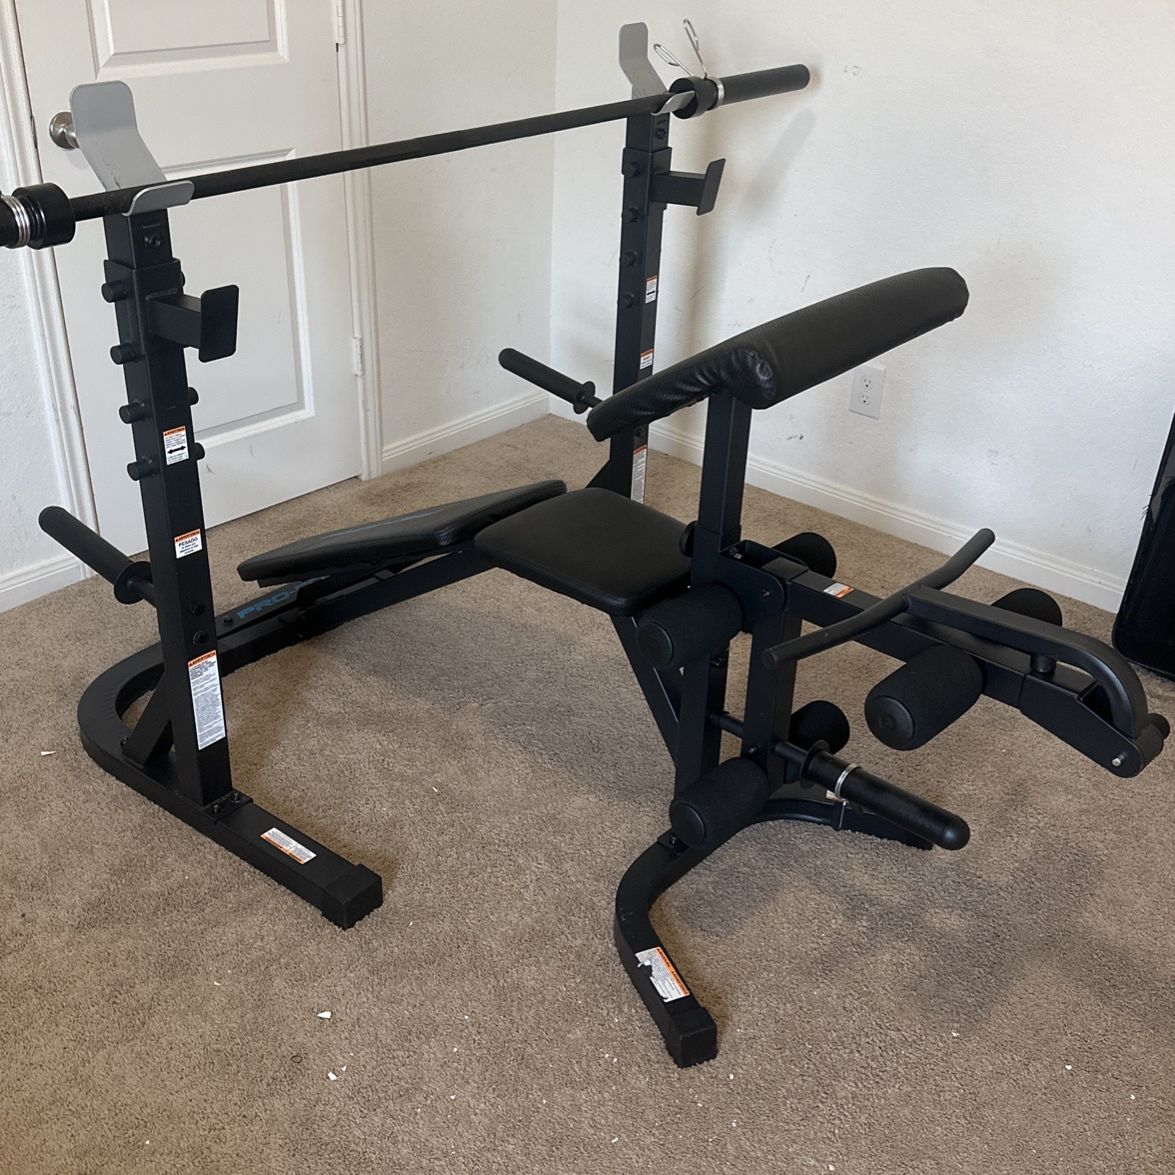 Weights and Workout Bench For Sale 